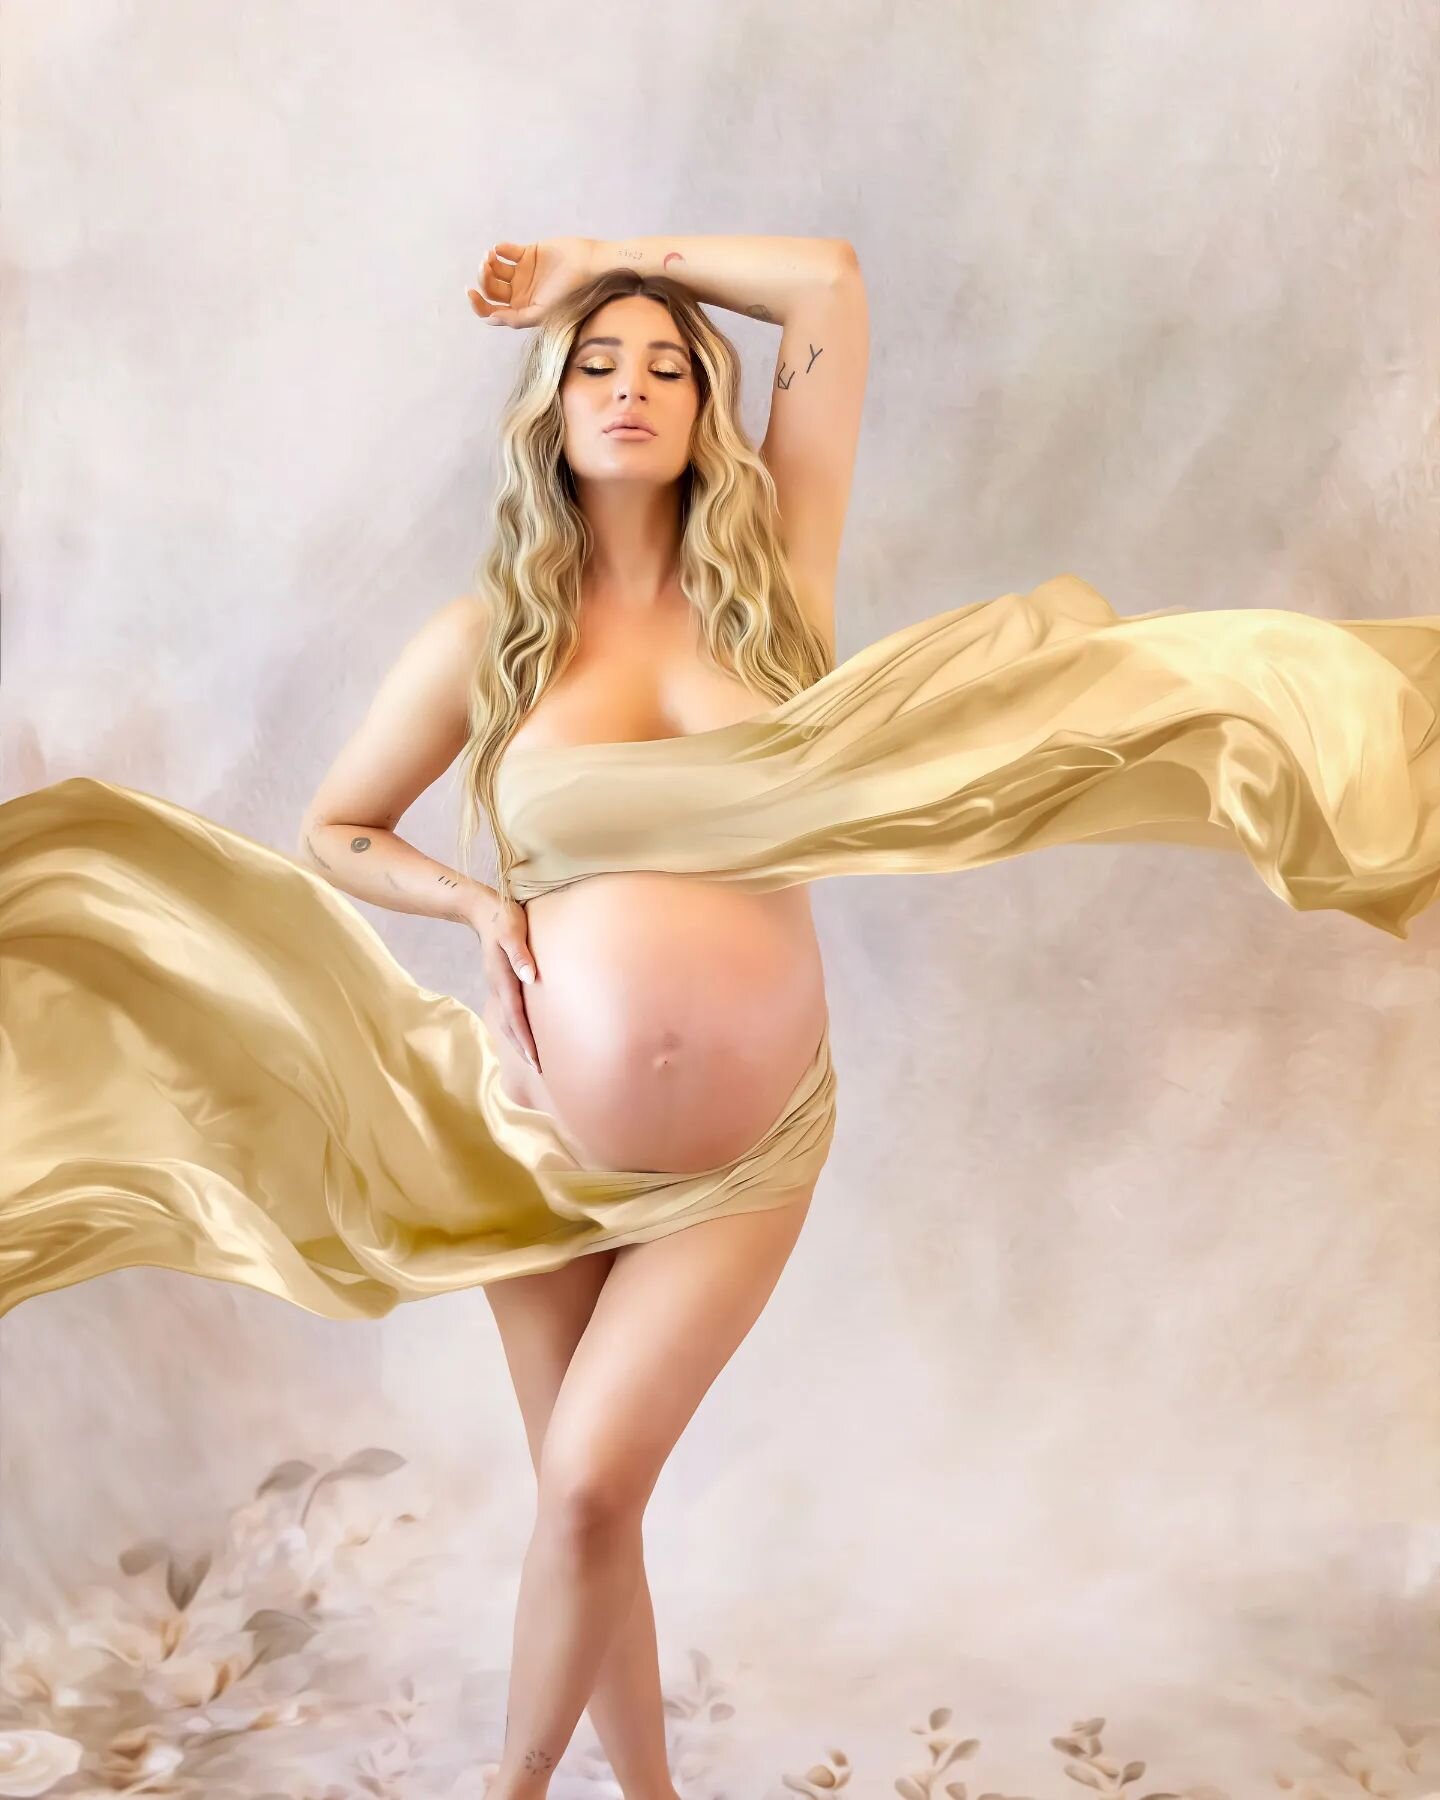 Beauty and confidence in the midst of creation ✨️ 
muse @norellerafaeli 
makeup @epurveor 
.
.
#maternityphotography #maternityshoot #expecting #beauty #goddess #thebump #pregnancyphotoshoot #pregnancy #laphotographer #losangelespgotographer #materni